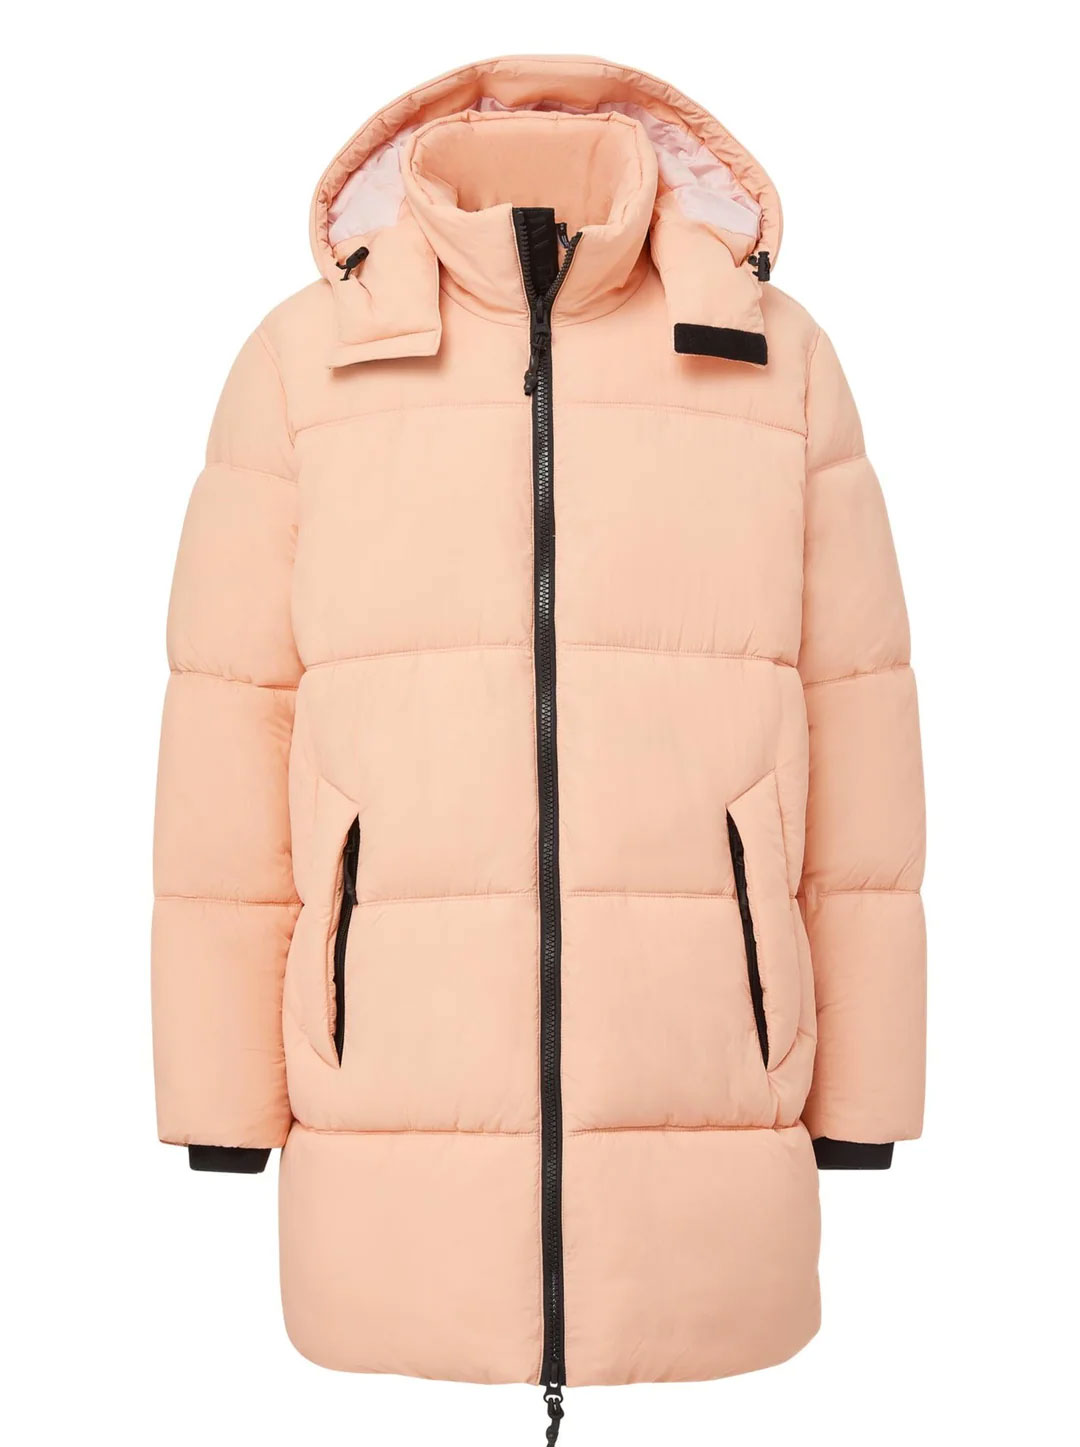 Recycled puffer jacket parka in peach pink